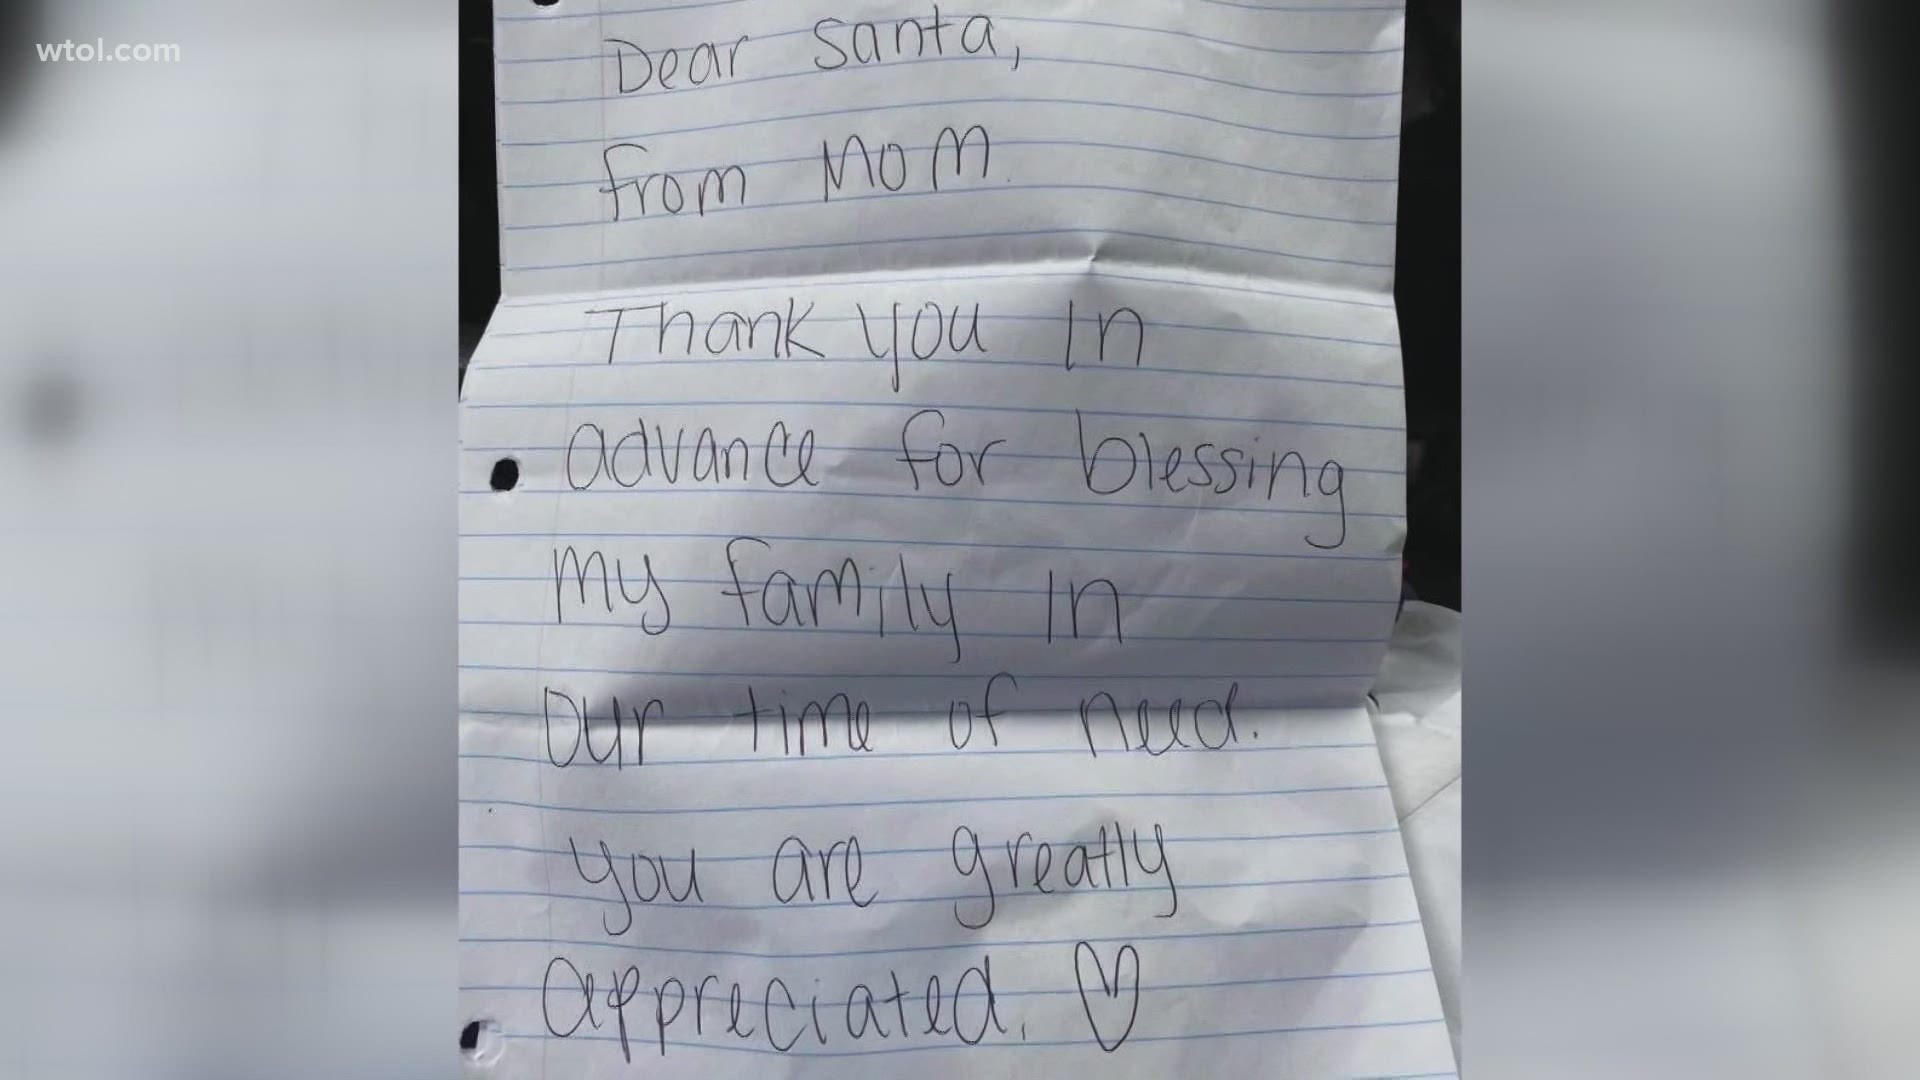 Conchita Coffey was dropping off Christmas wishes for Santa and the postal worker who received it decided to make the wishes a reality.